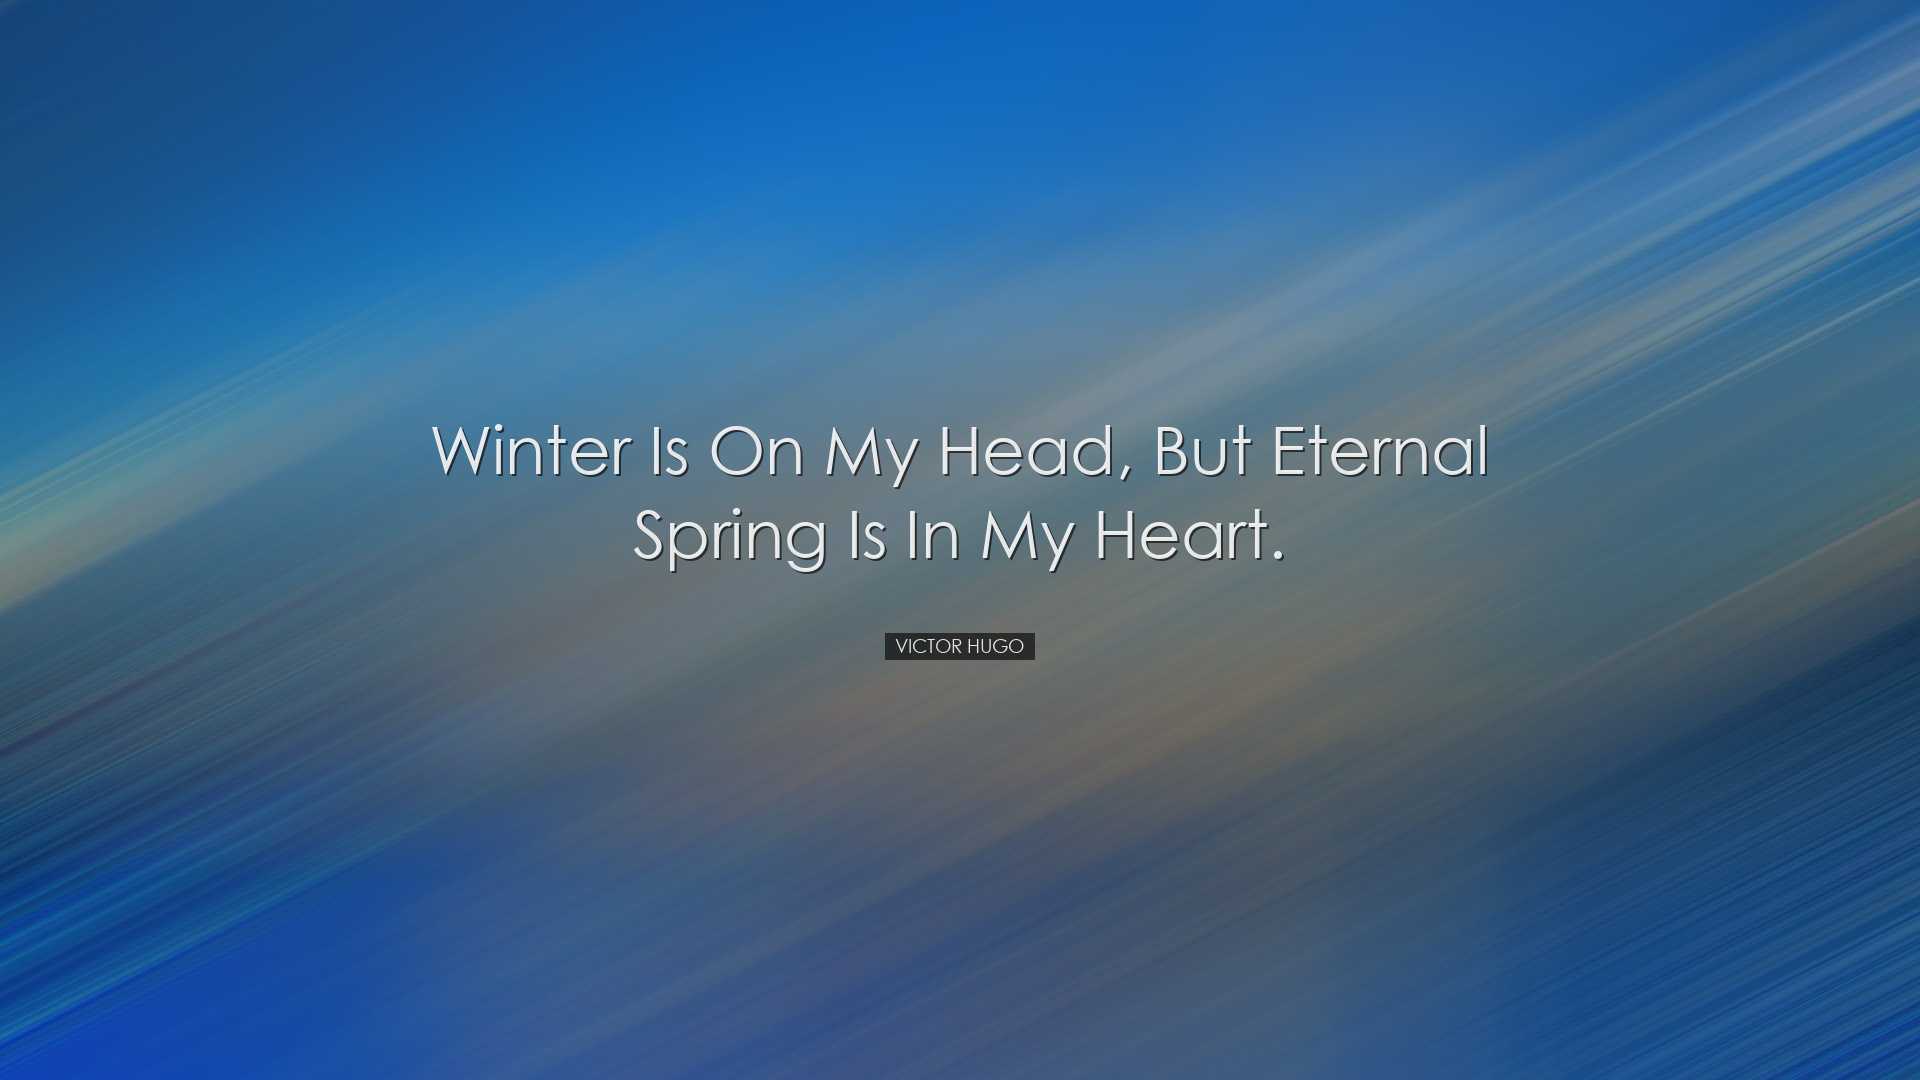 Winter is on my head, but eternal spring is in my heart. - Victor